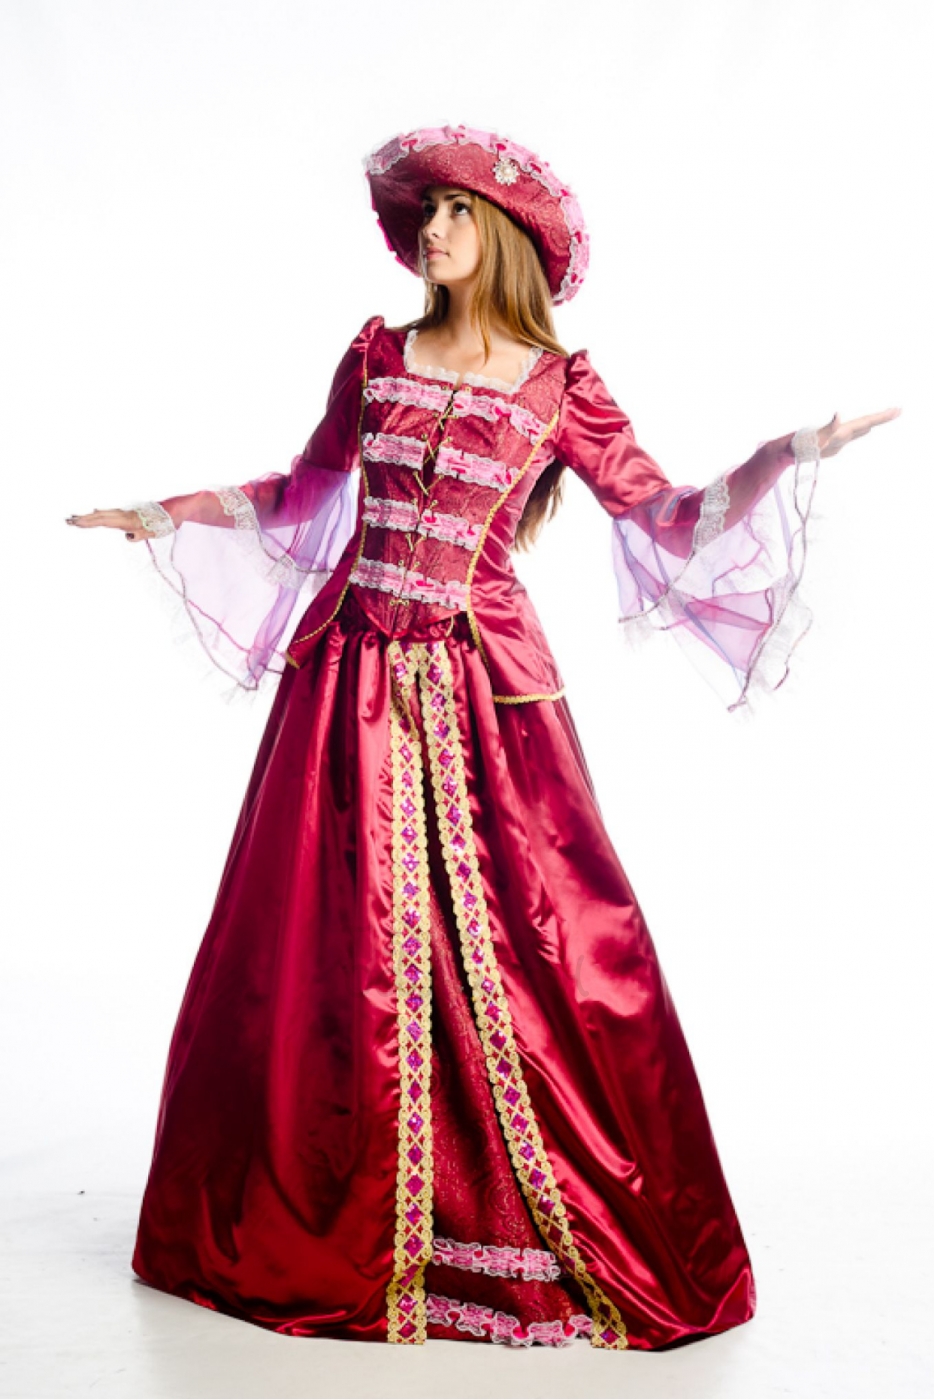 Baroness Long red dress history style costume for woman